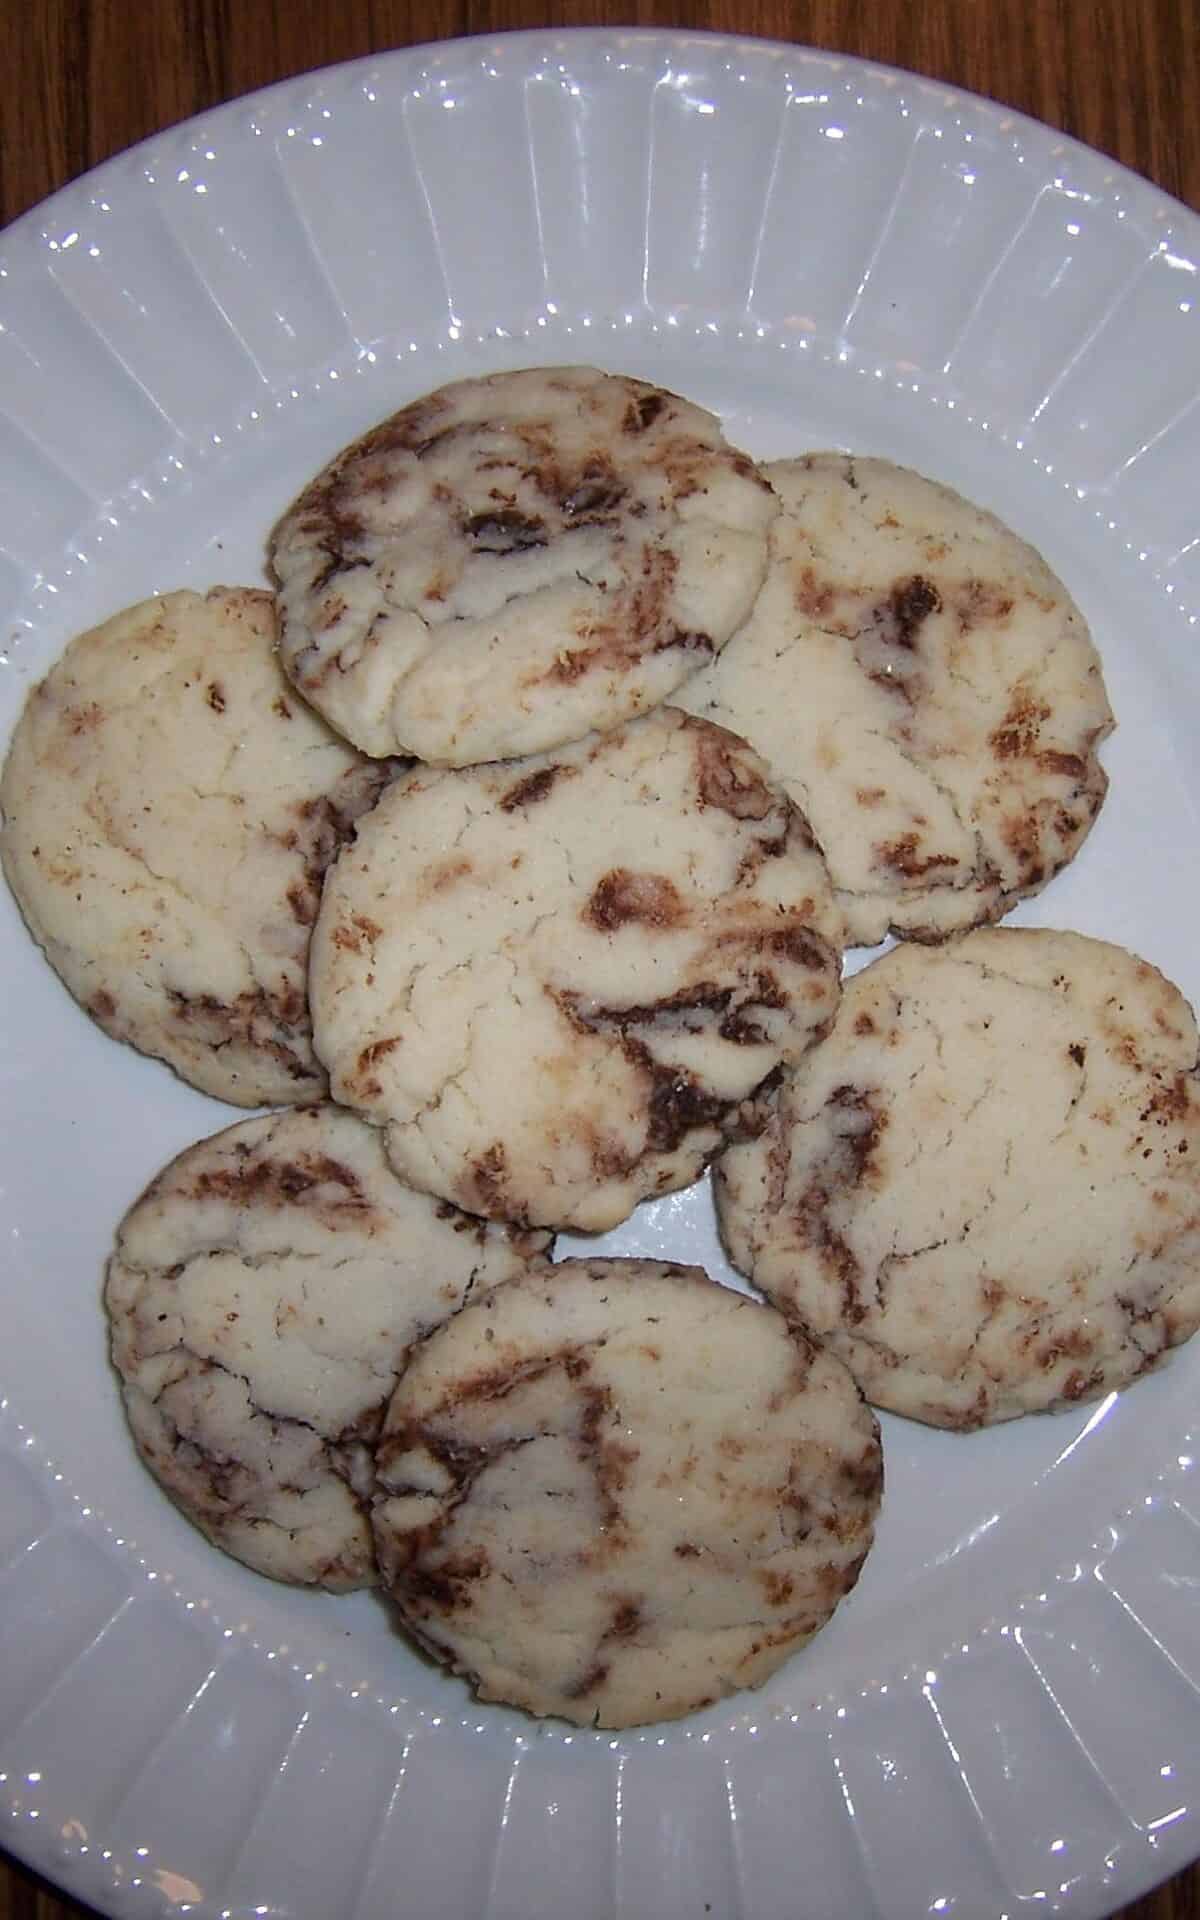  Sweet and savory, these cookies are an all-time favorite.